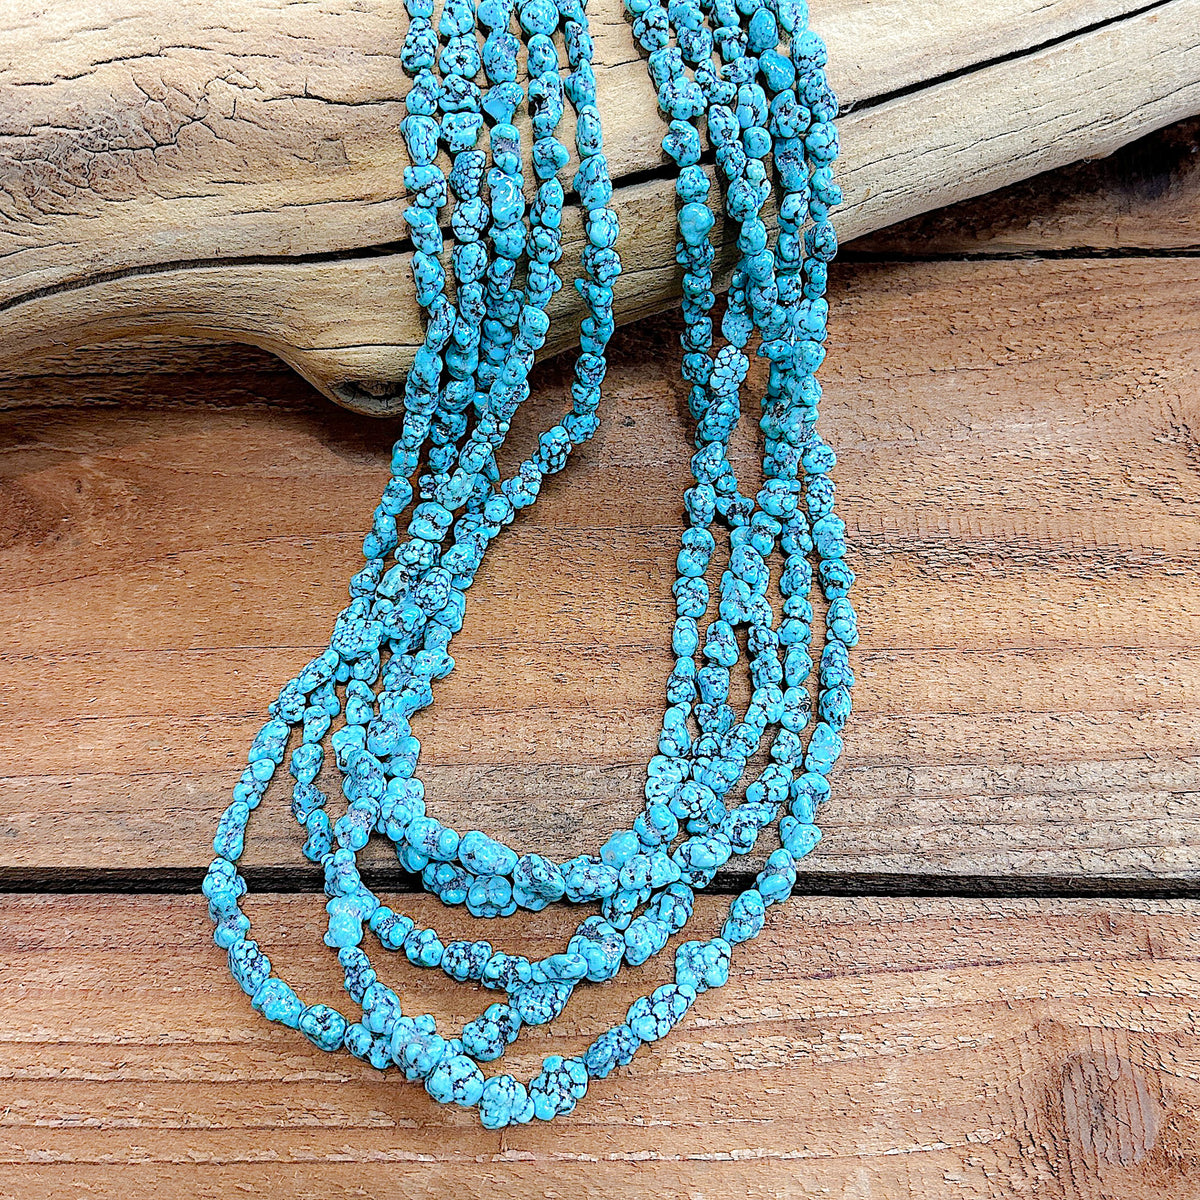 A 36" long Kingman Turquoise necklace that features natural freeform Turquoise nuggets.